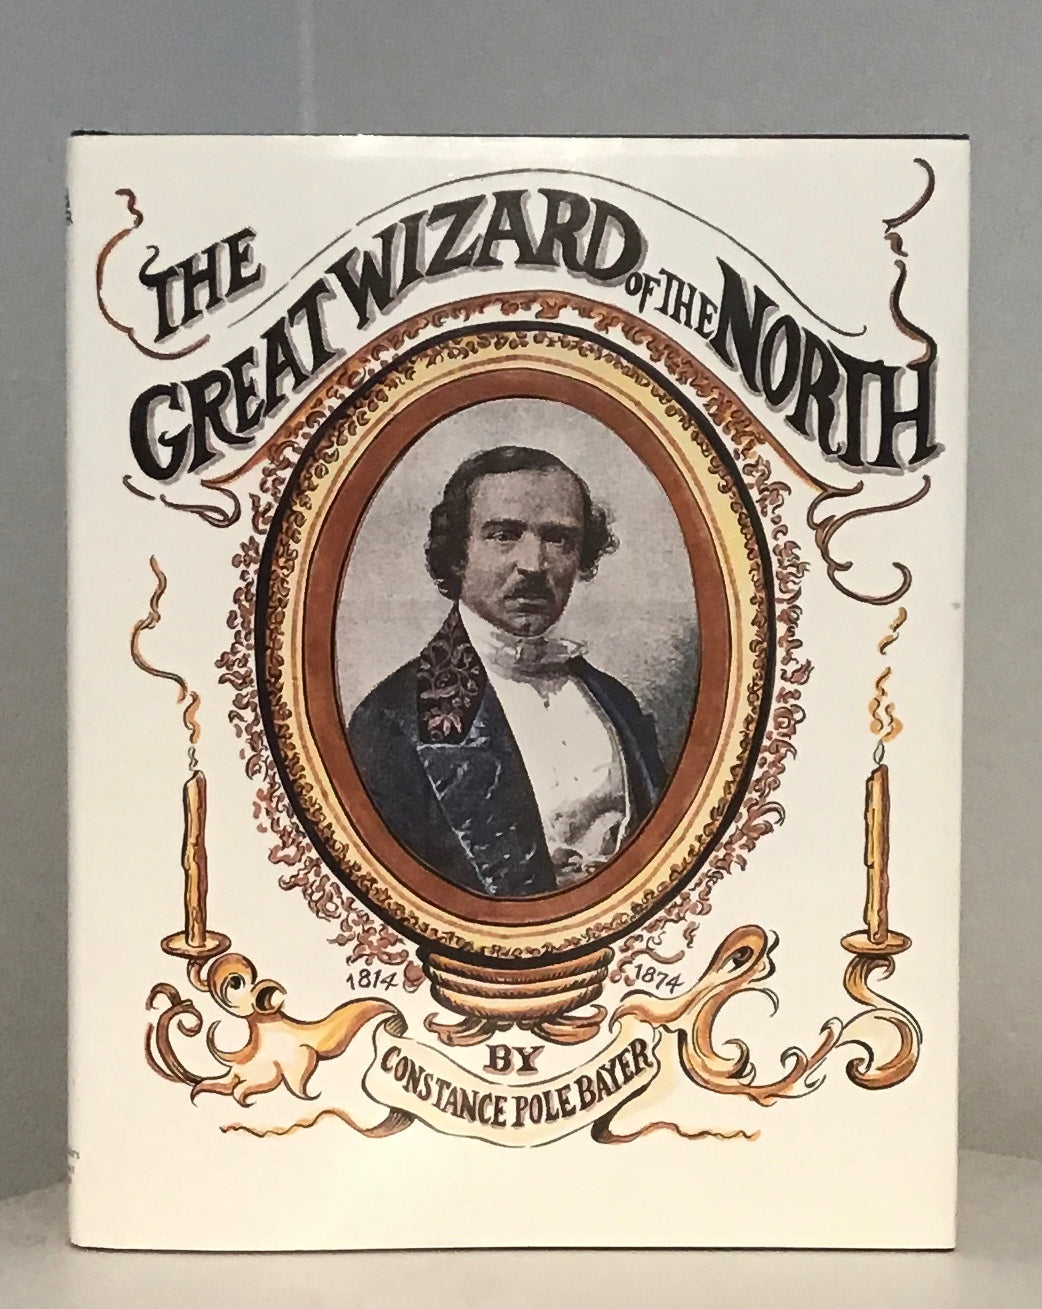 The Great Wizard of the North John Henry Anderson